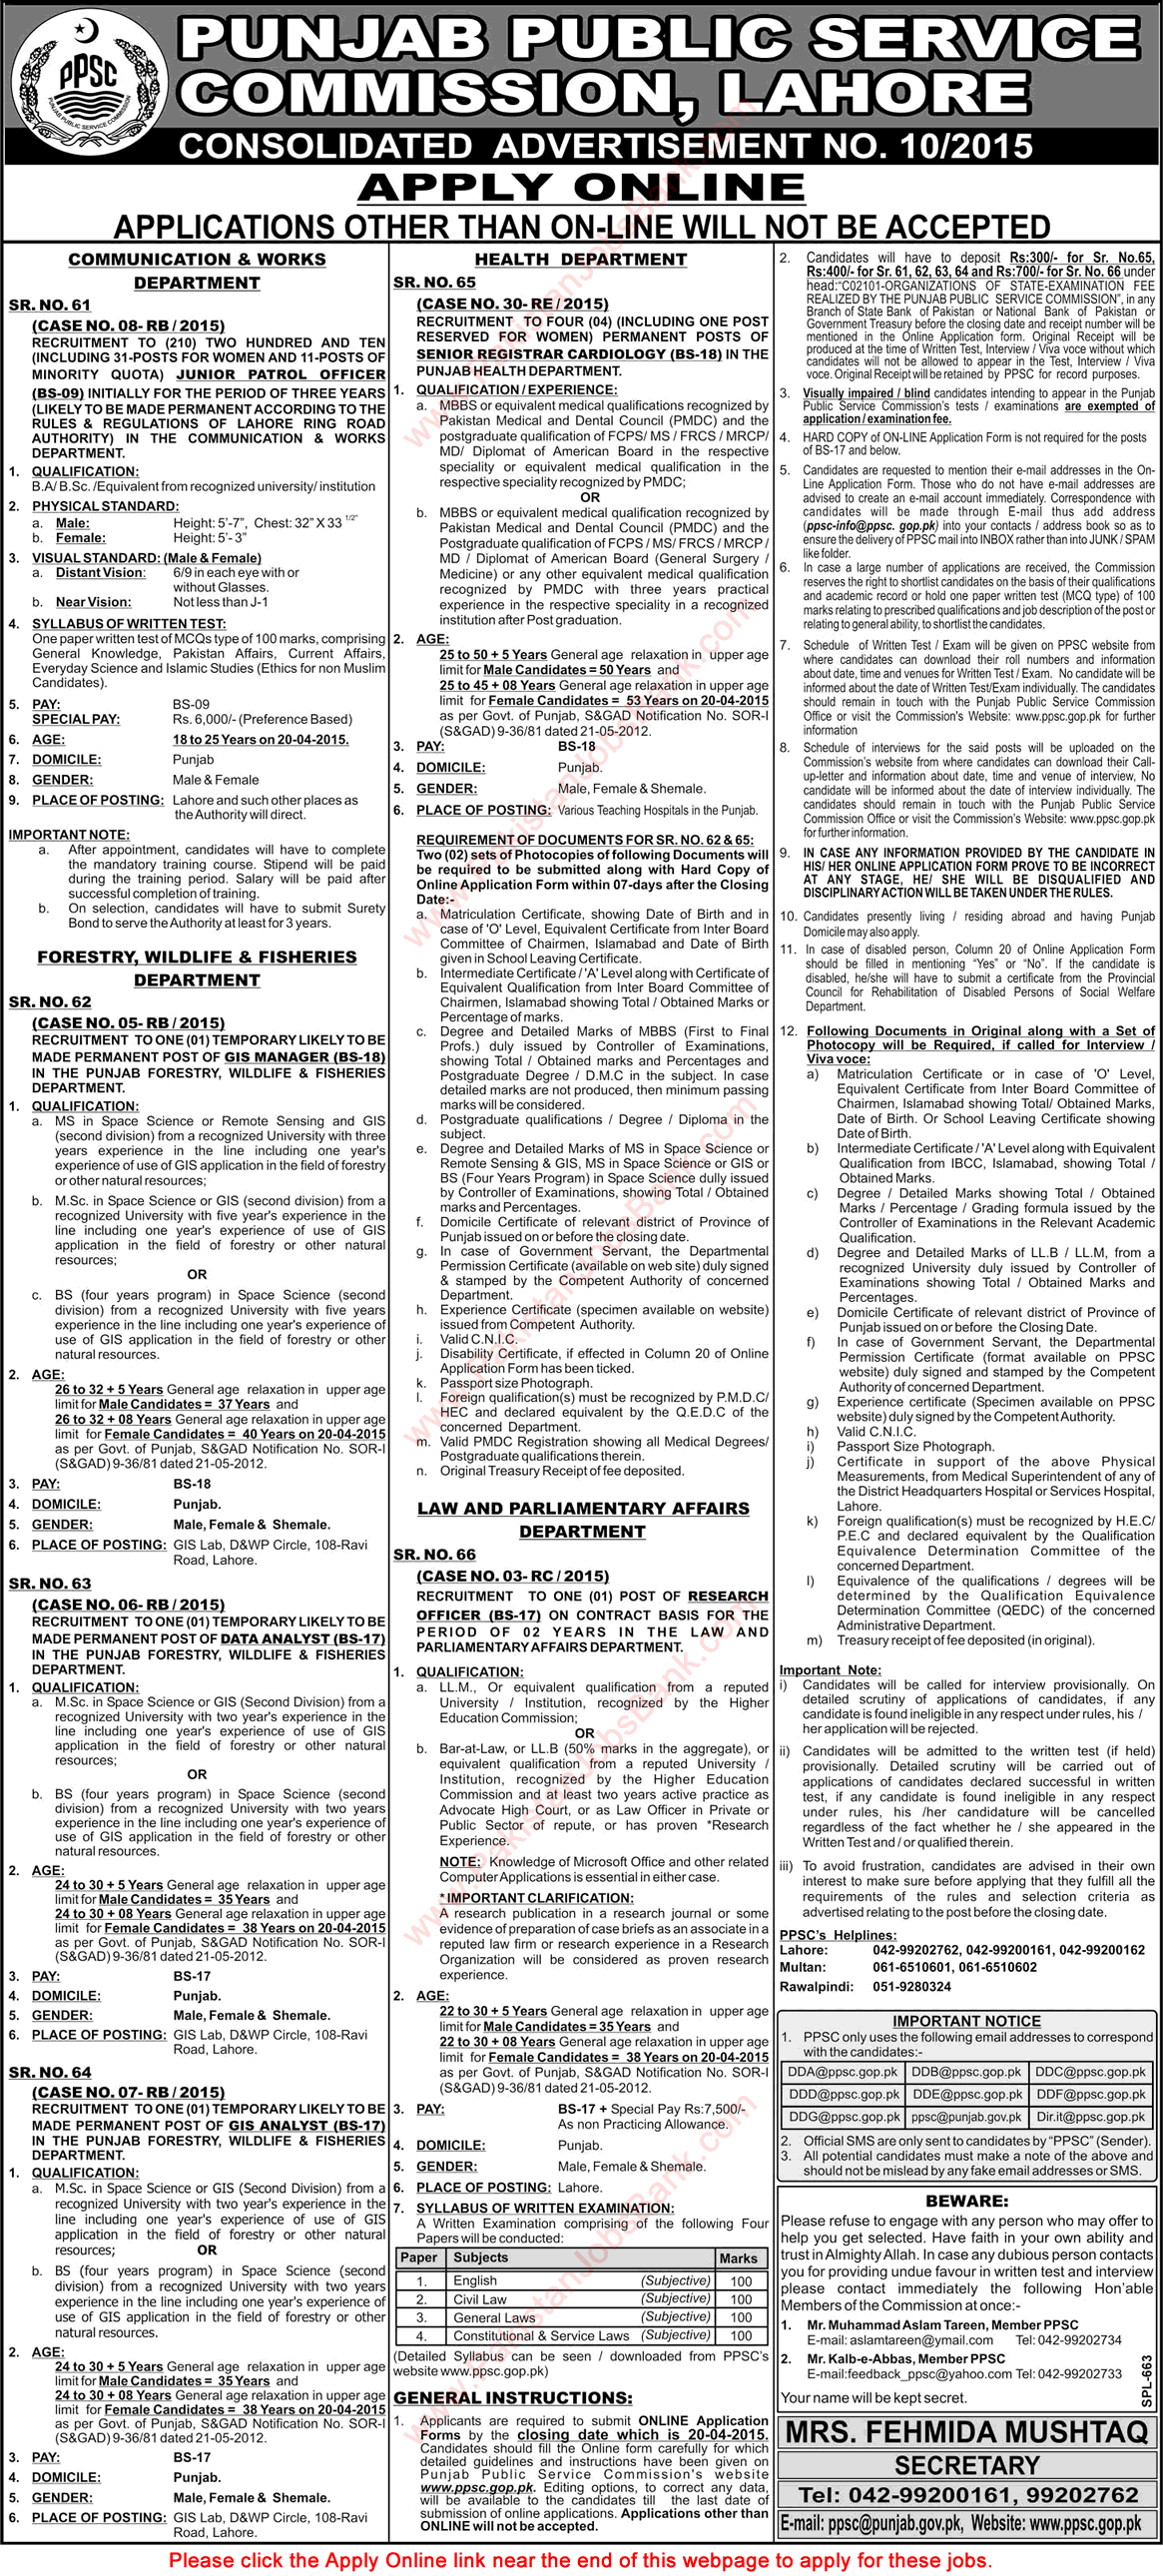 PPSC Jobs April 2015 Apply Online Consolidated Advertisement No 10/2015 Latest